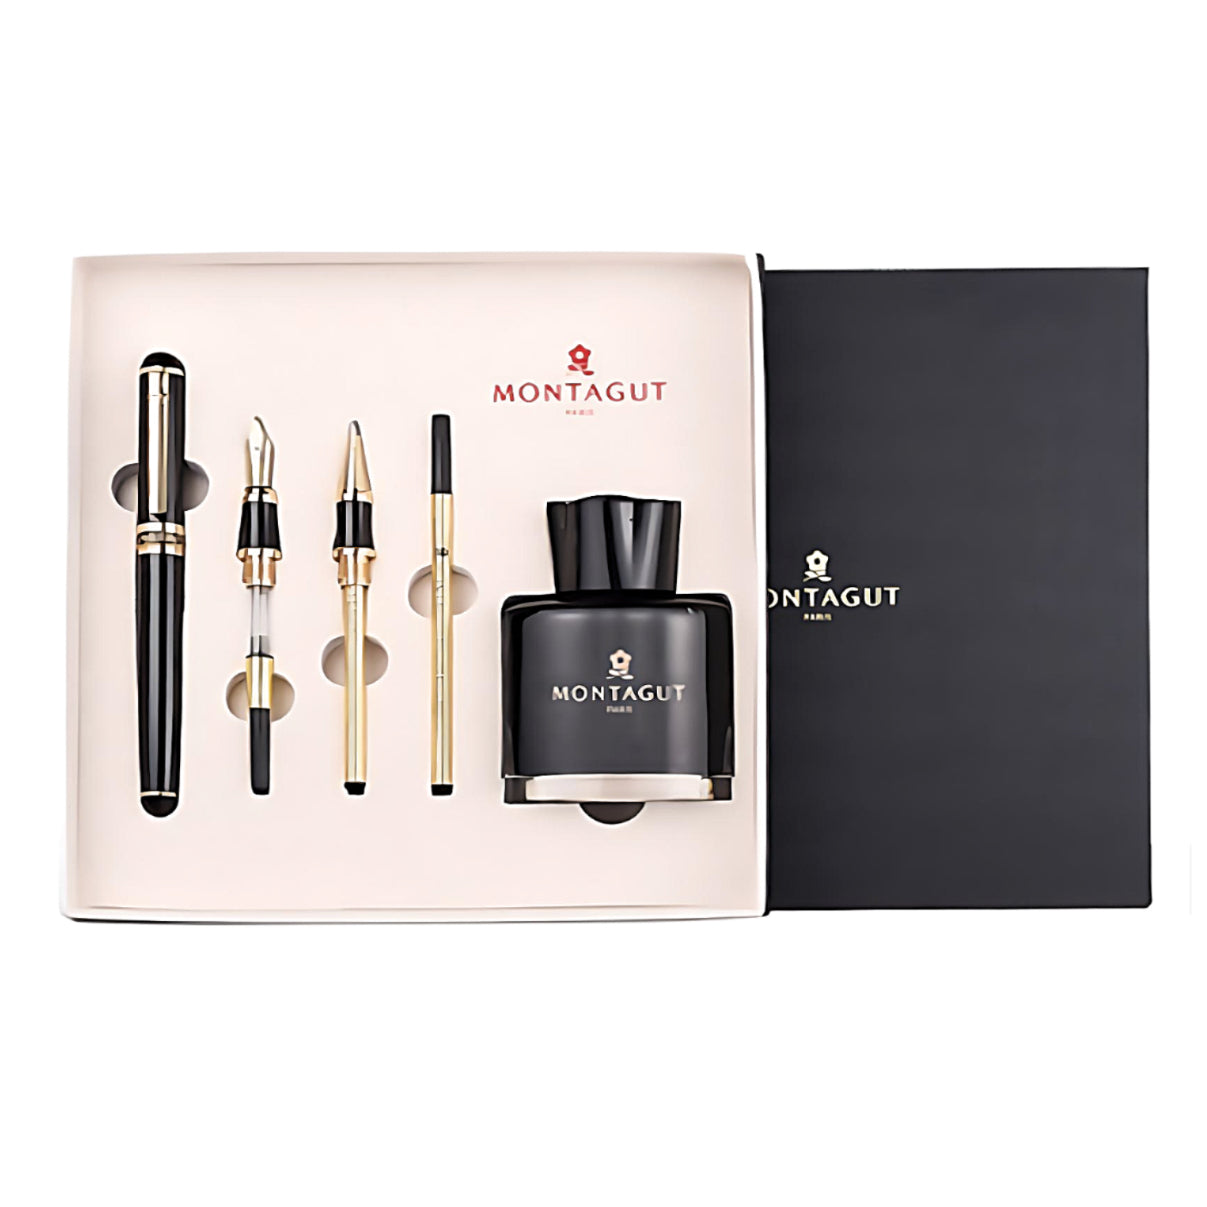 a Montagut Fountain Pen set in gold and black